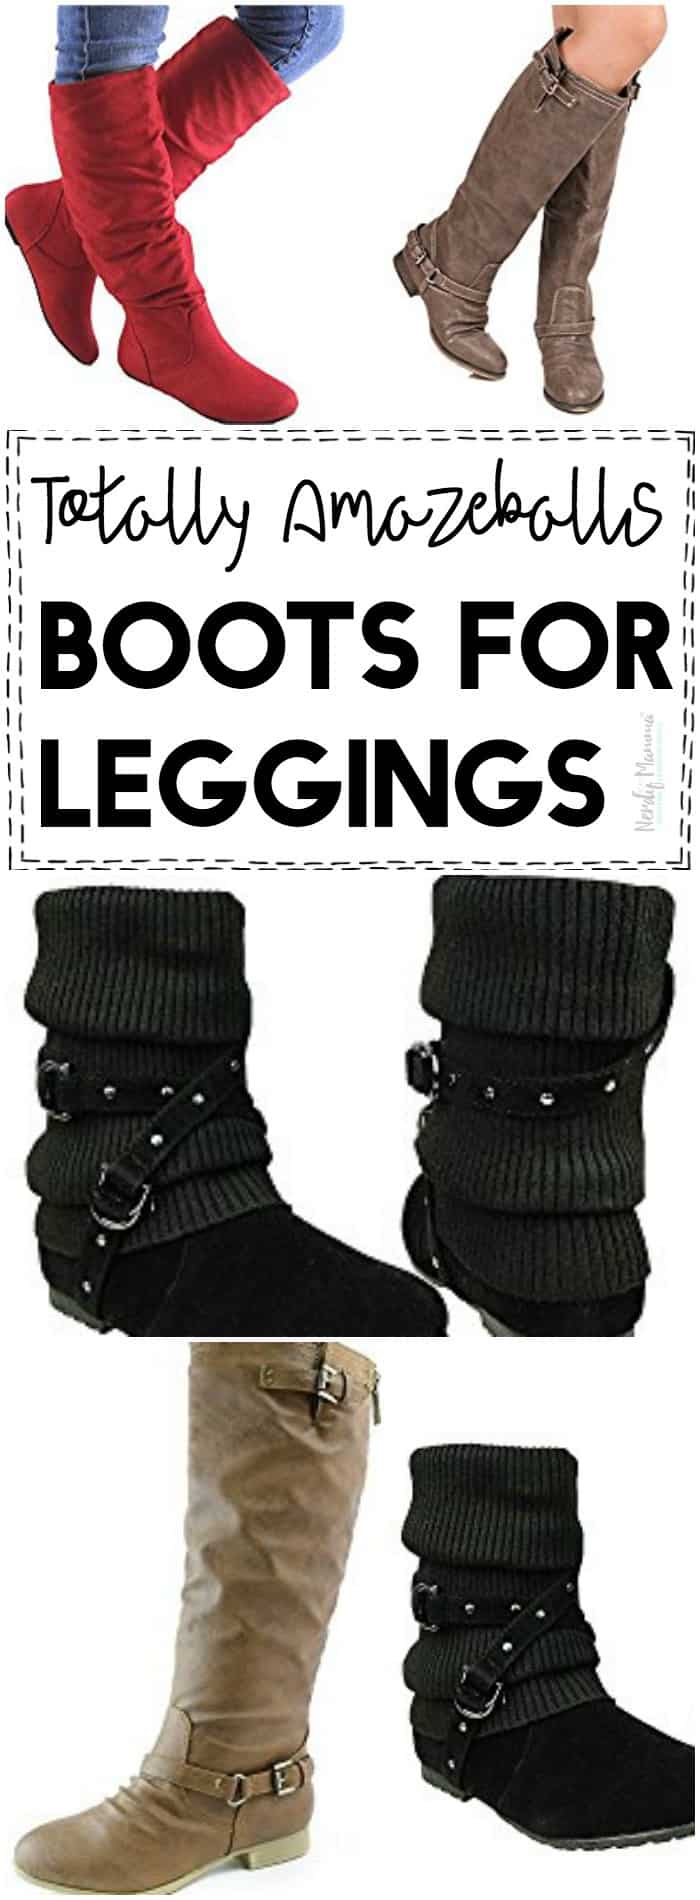 OMG These boots are PERFECT to wear with leggings!